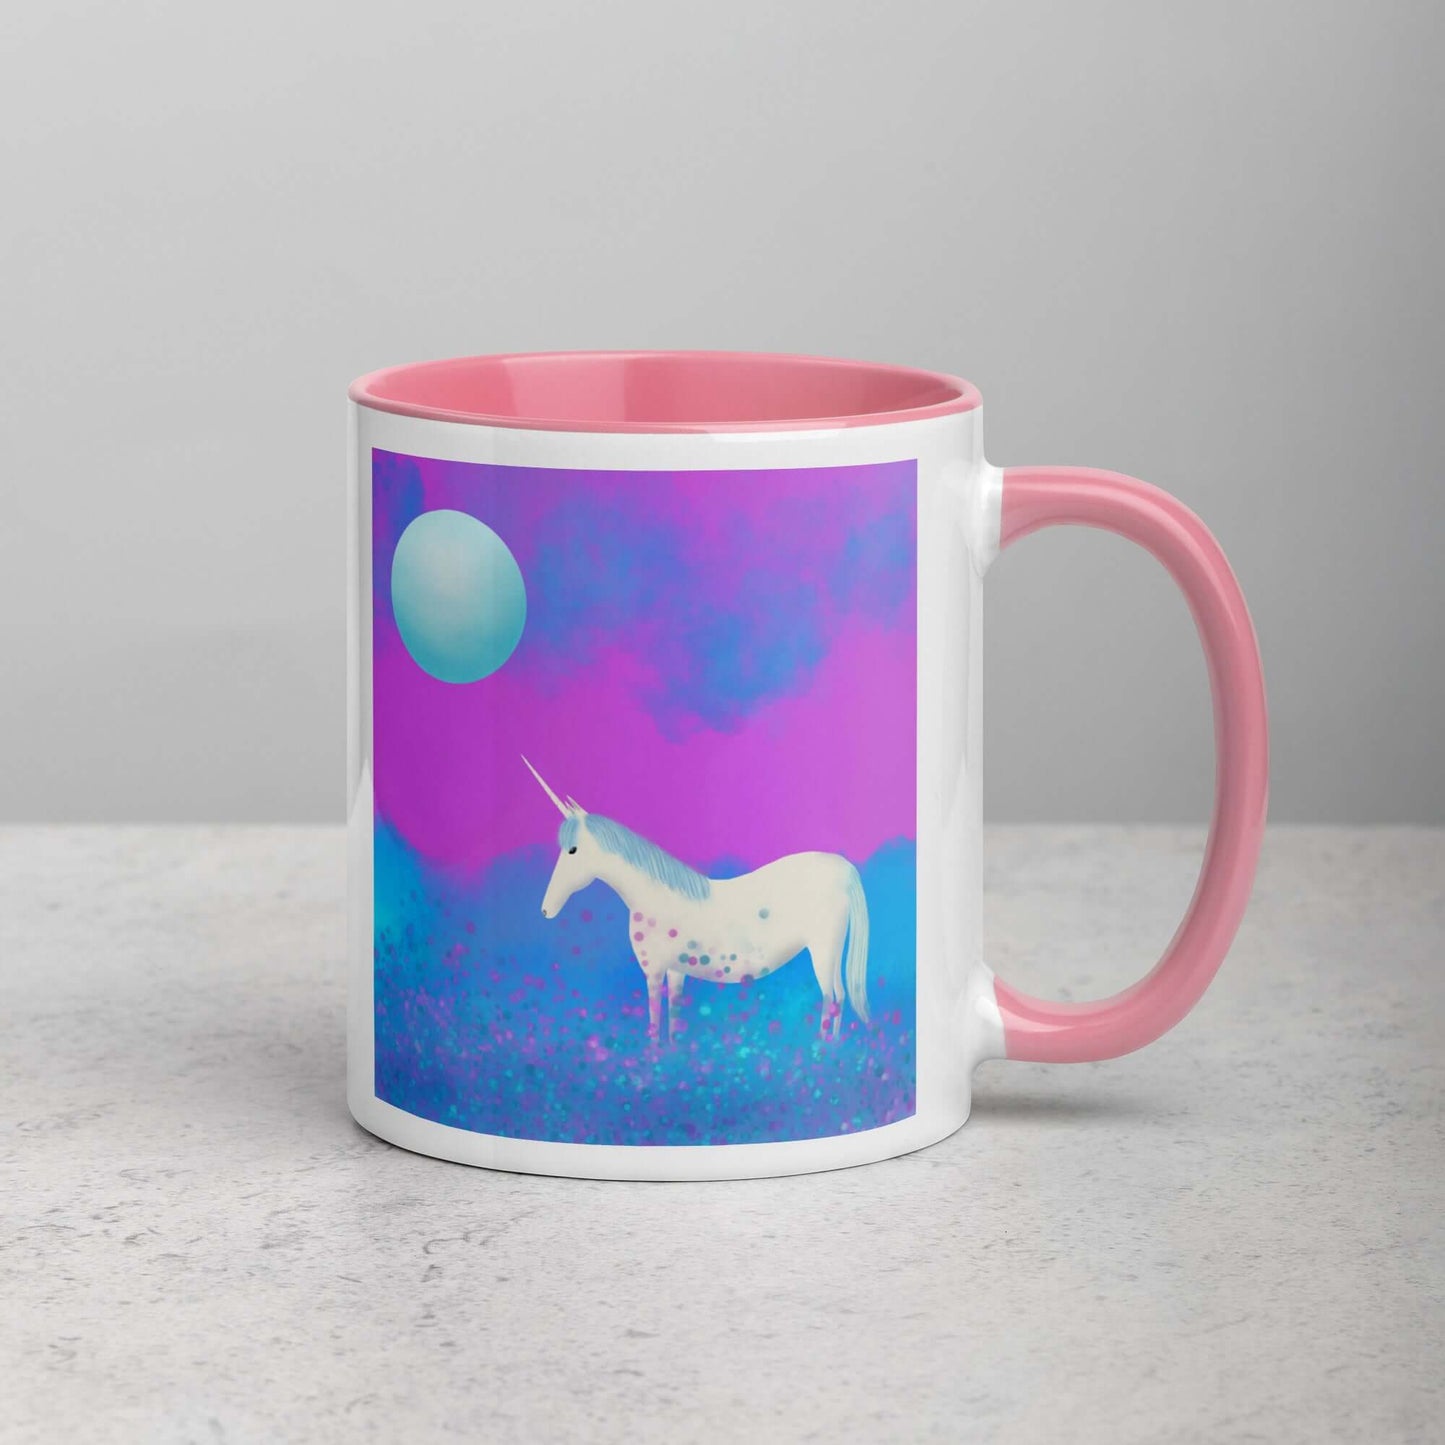 Blue and Purple Unicorn in the Mist with Full Moon “Mystical Unicorn” Mug with Light Pink Color Inside Right Handed Front View